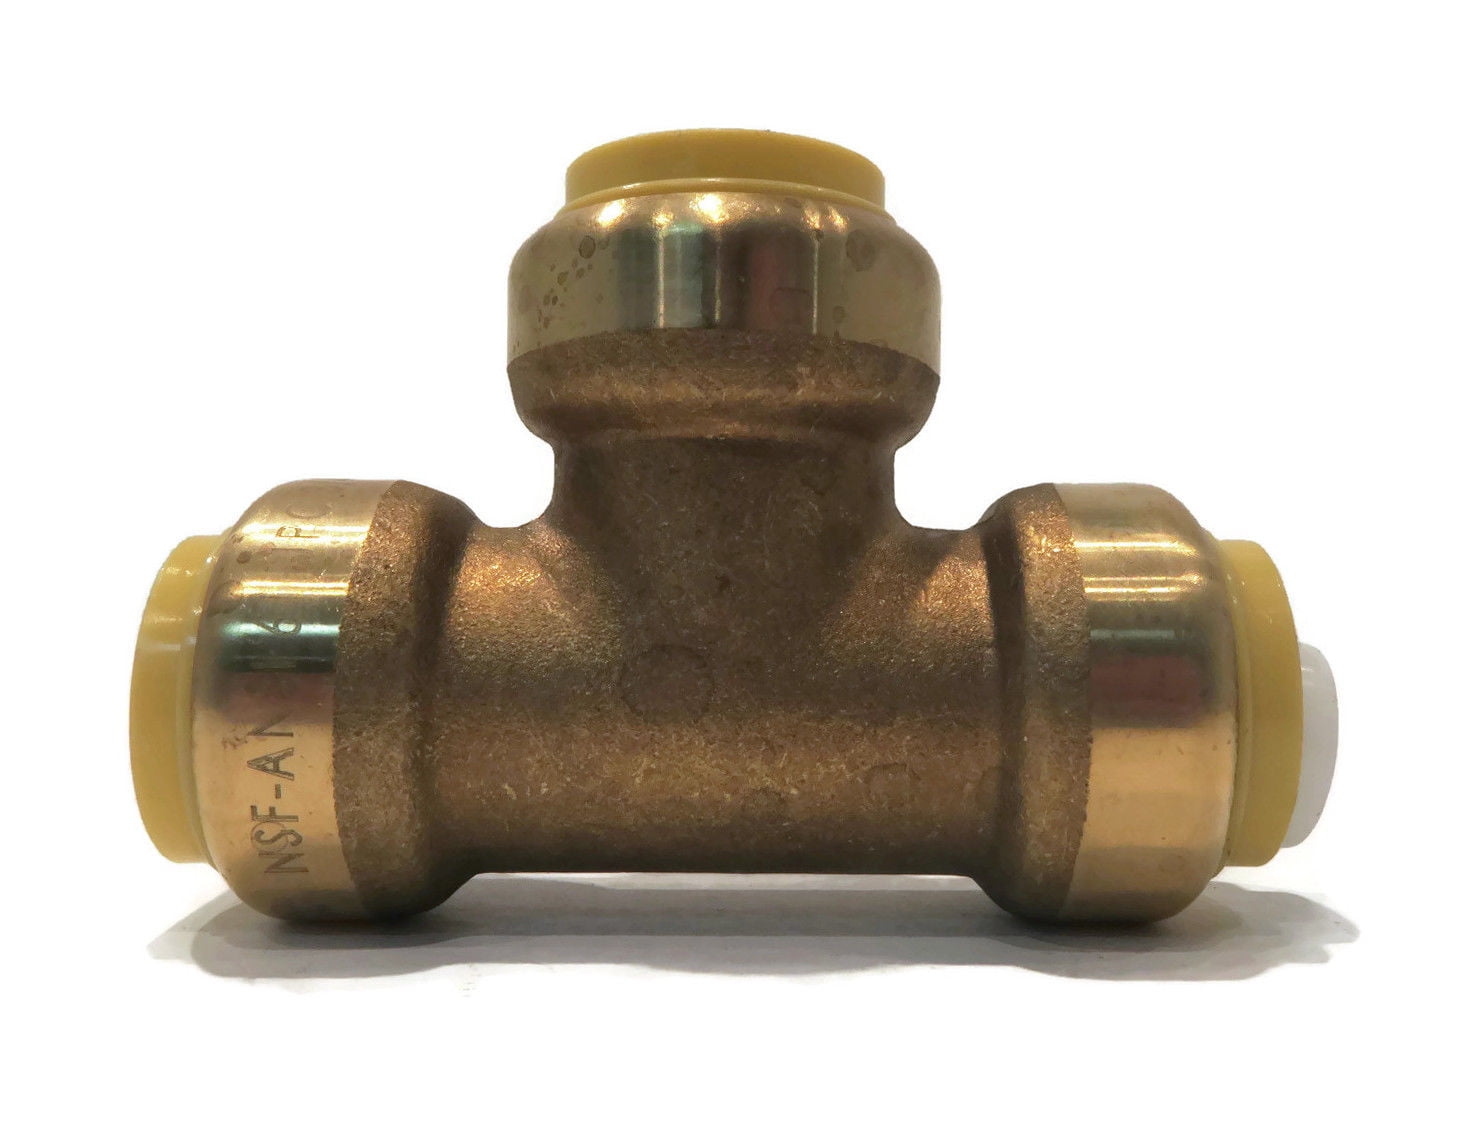 10 New 3/4" SharkBite Style Push to Connect 90 DEGREE LEAD FREE BRASS ELBOWS